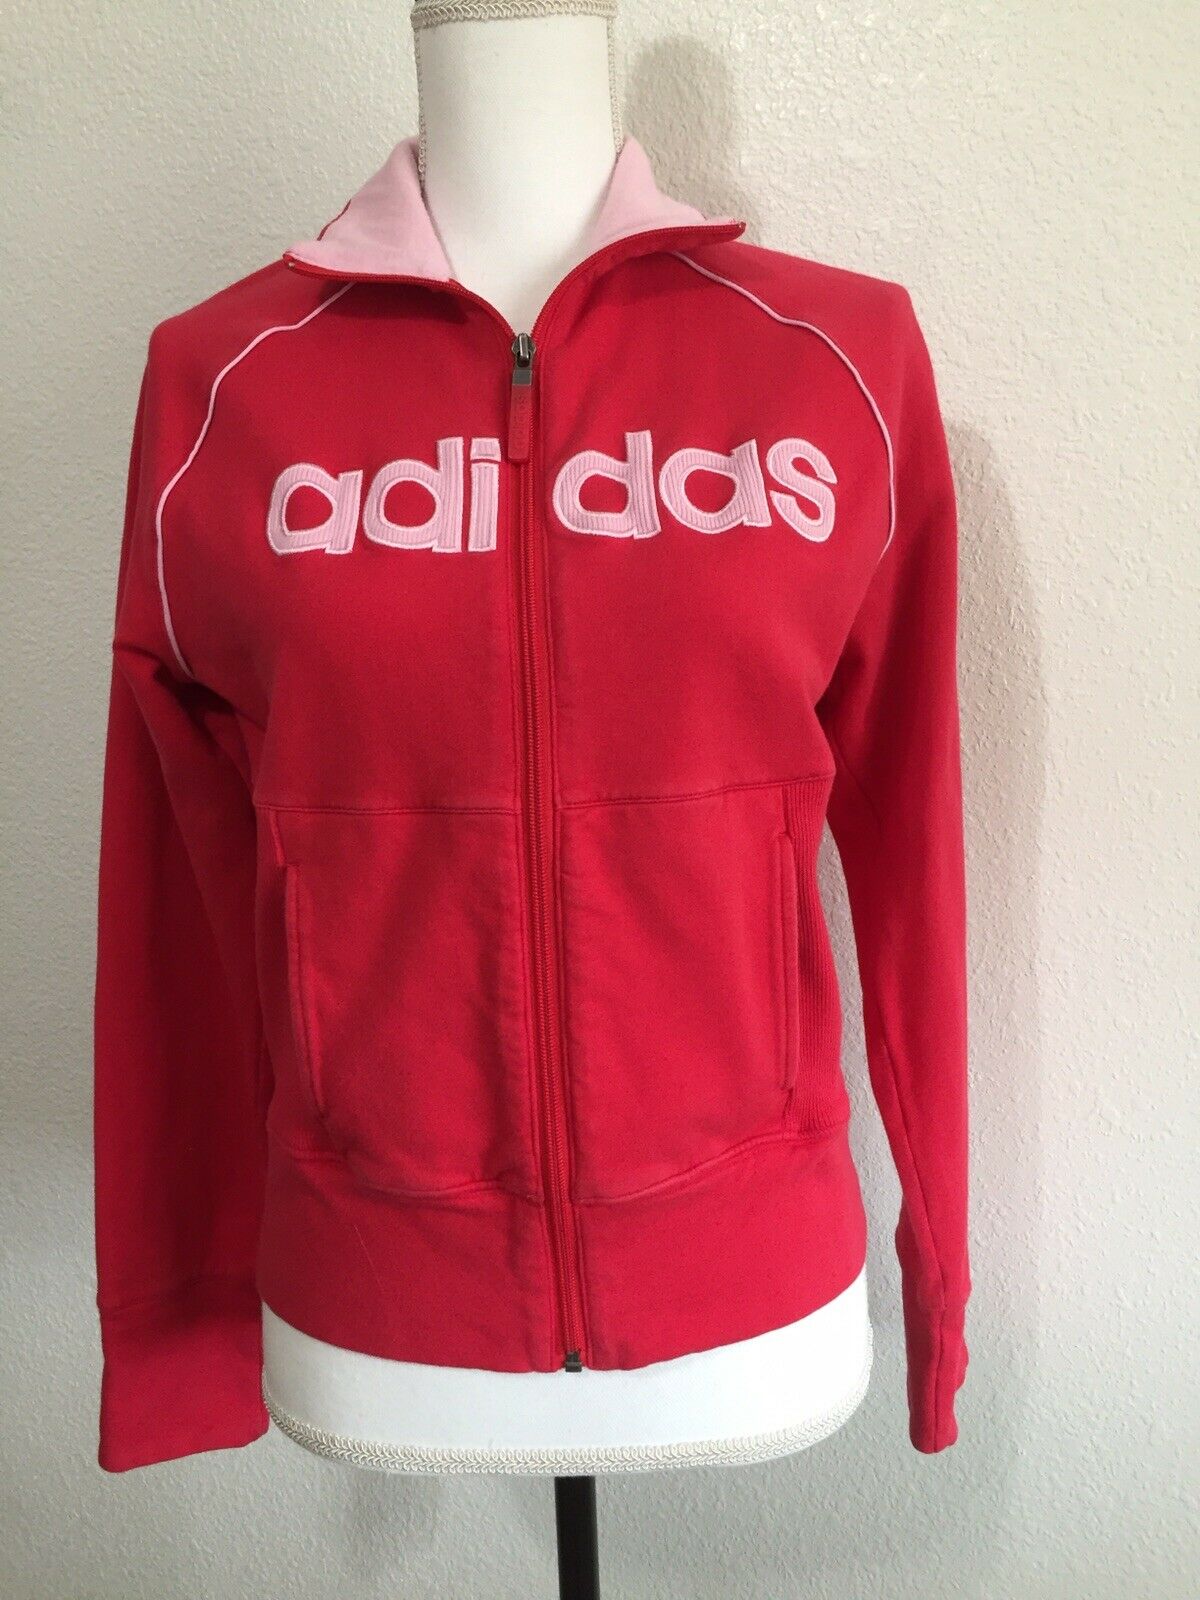 Adidas, Womans, Jacket Size M, Red